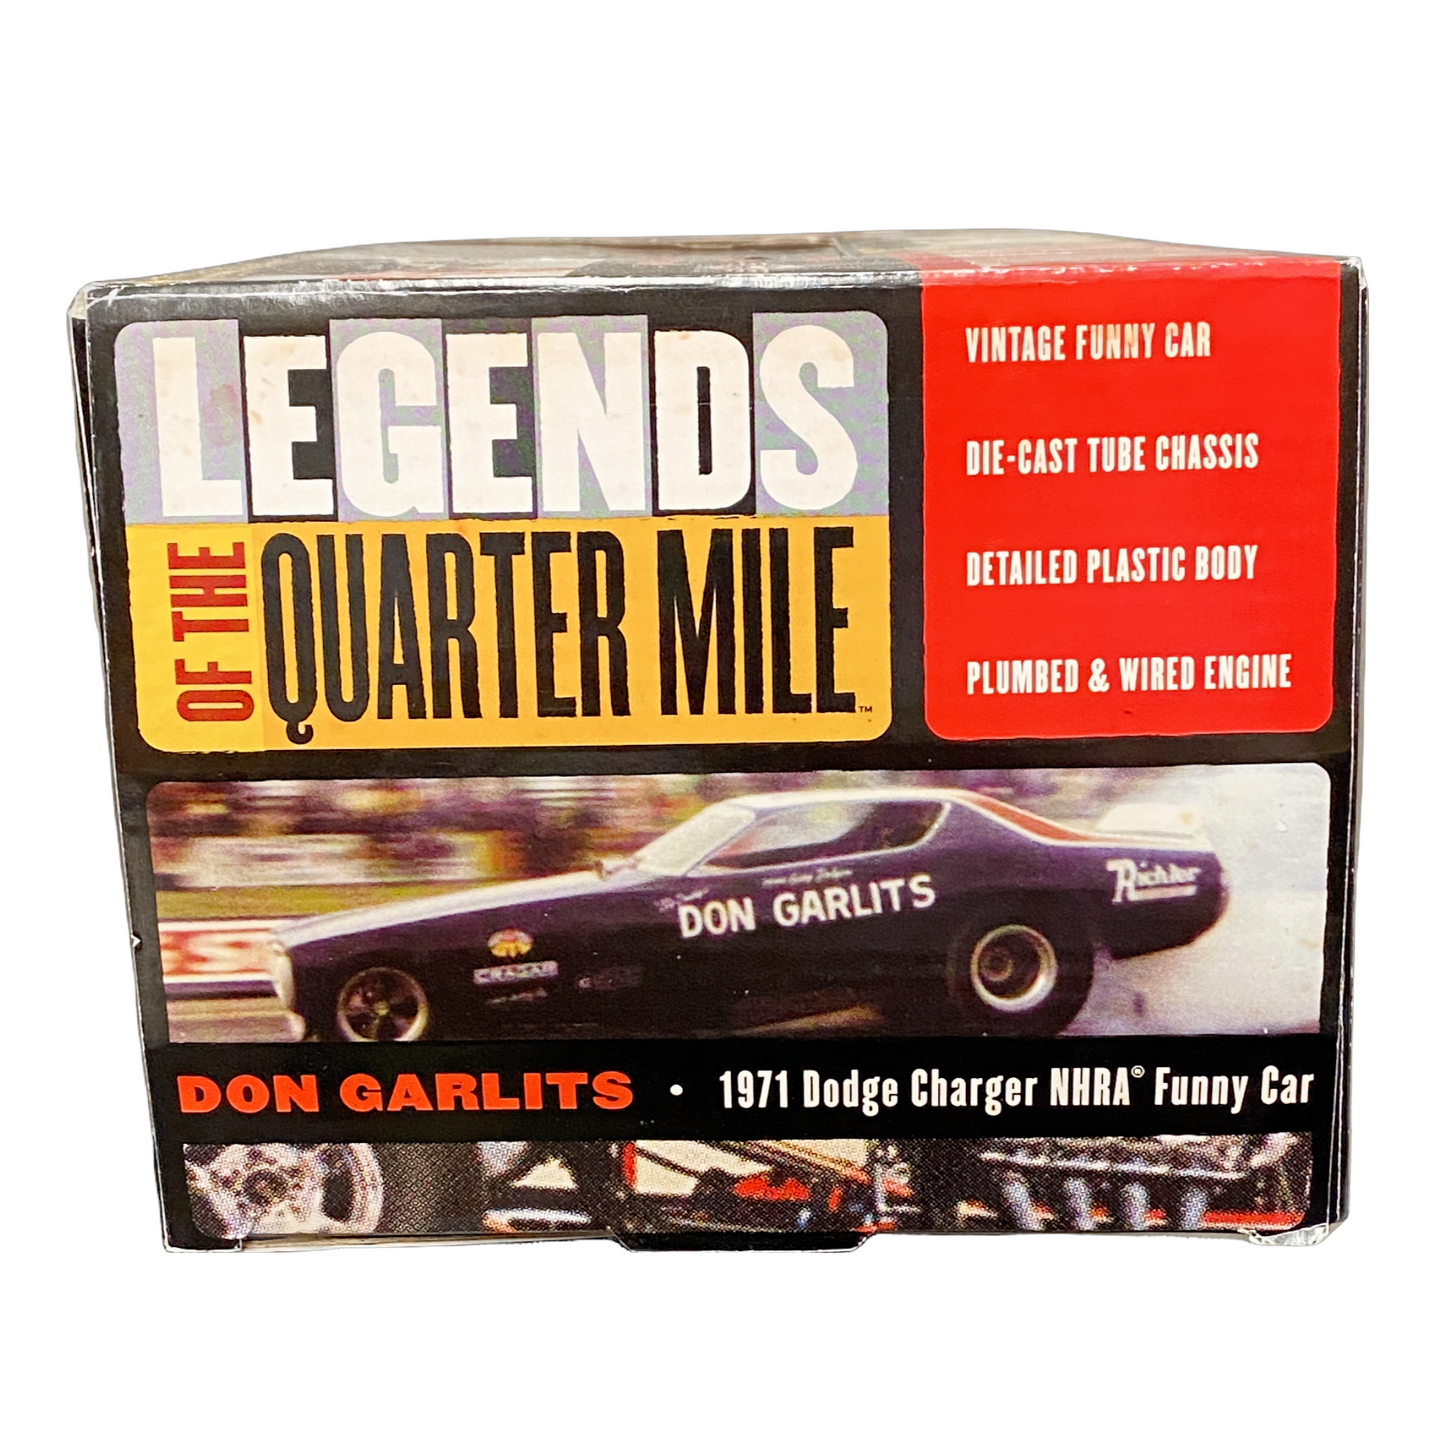 1/18 Scale 1971 Dodge	Funny Car Don Garlits "Big daddy" Black/ White strips on hood/ Graphics - Autoworld